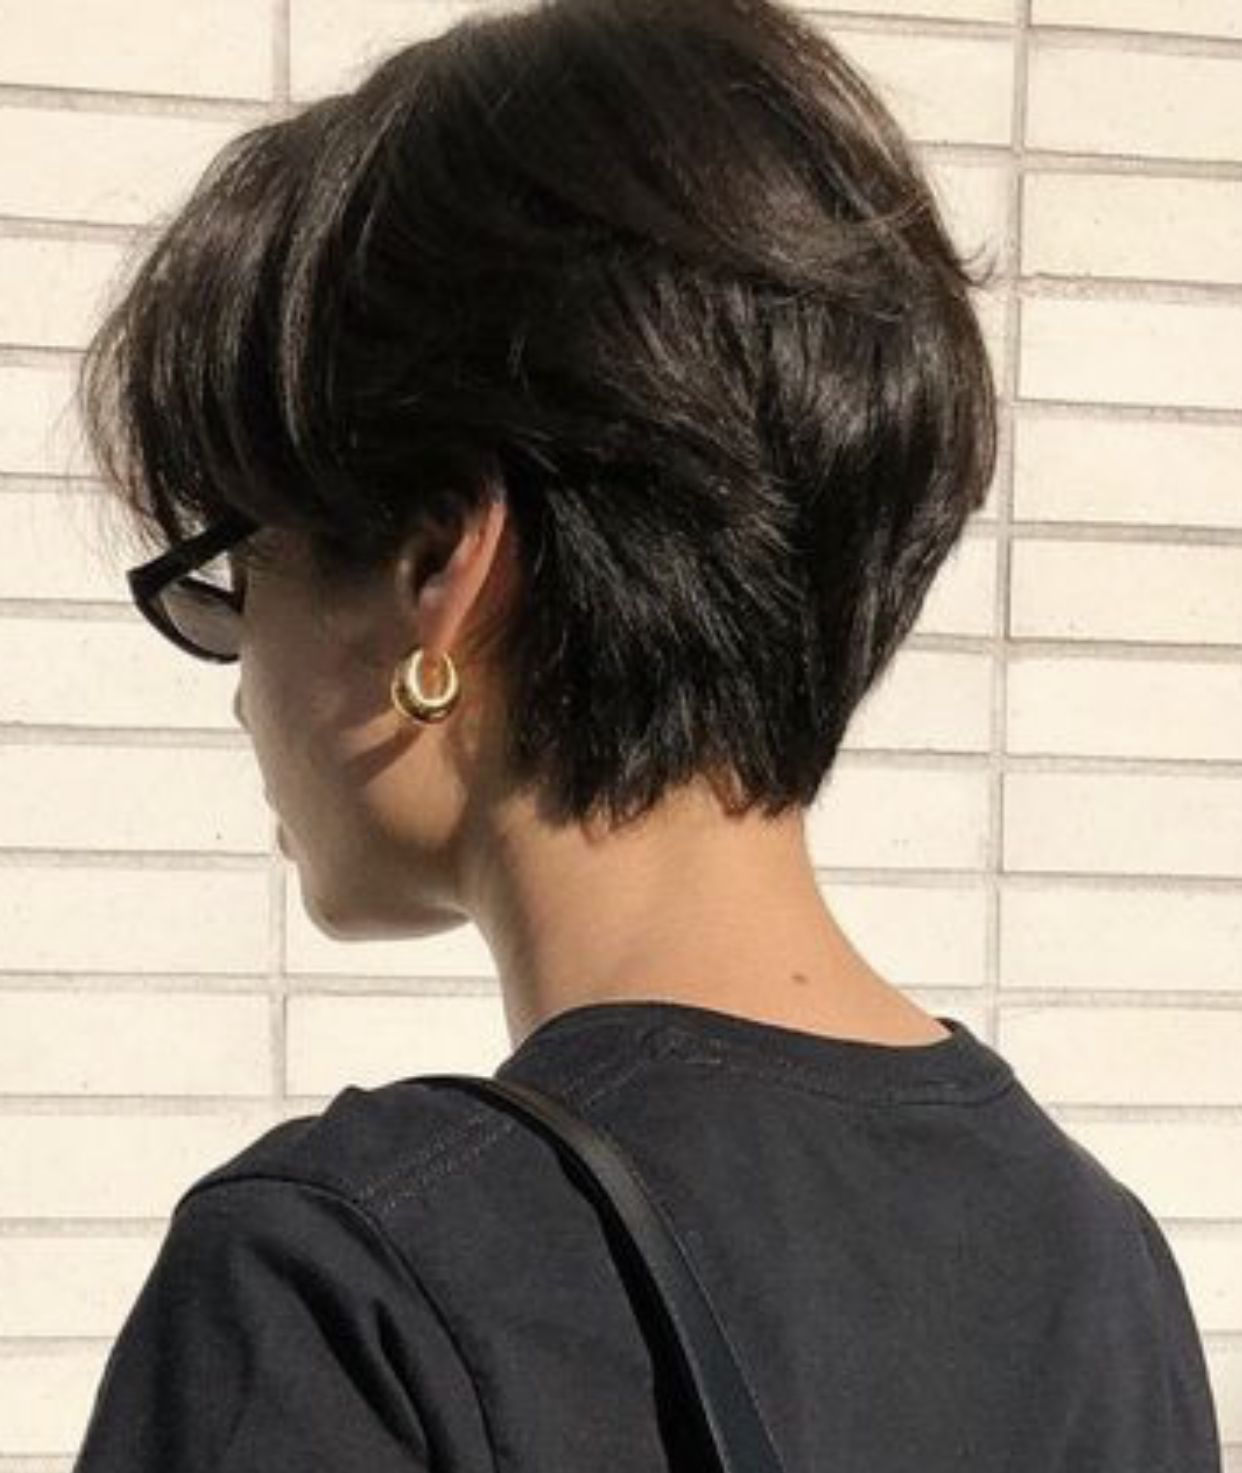 Chic and Stylish: Short Straight Hairstyles for a Trendy Look